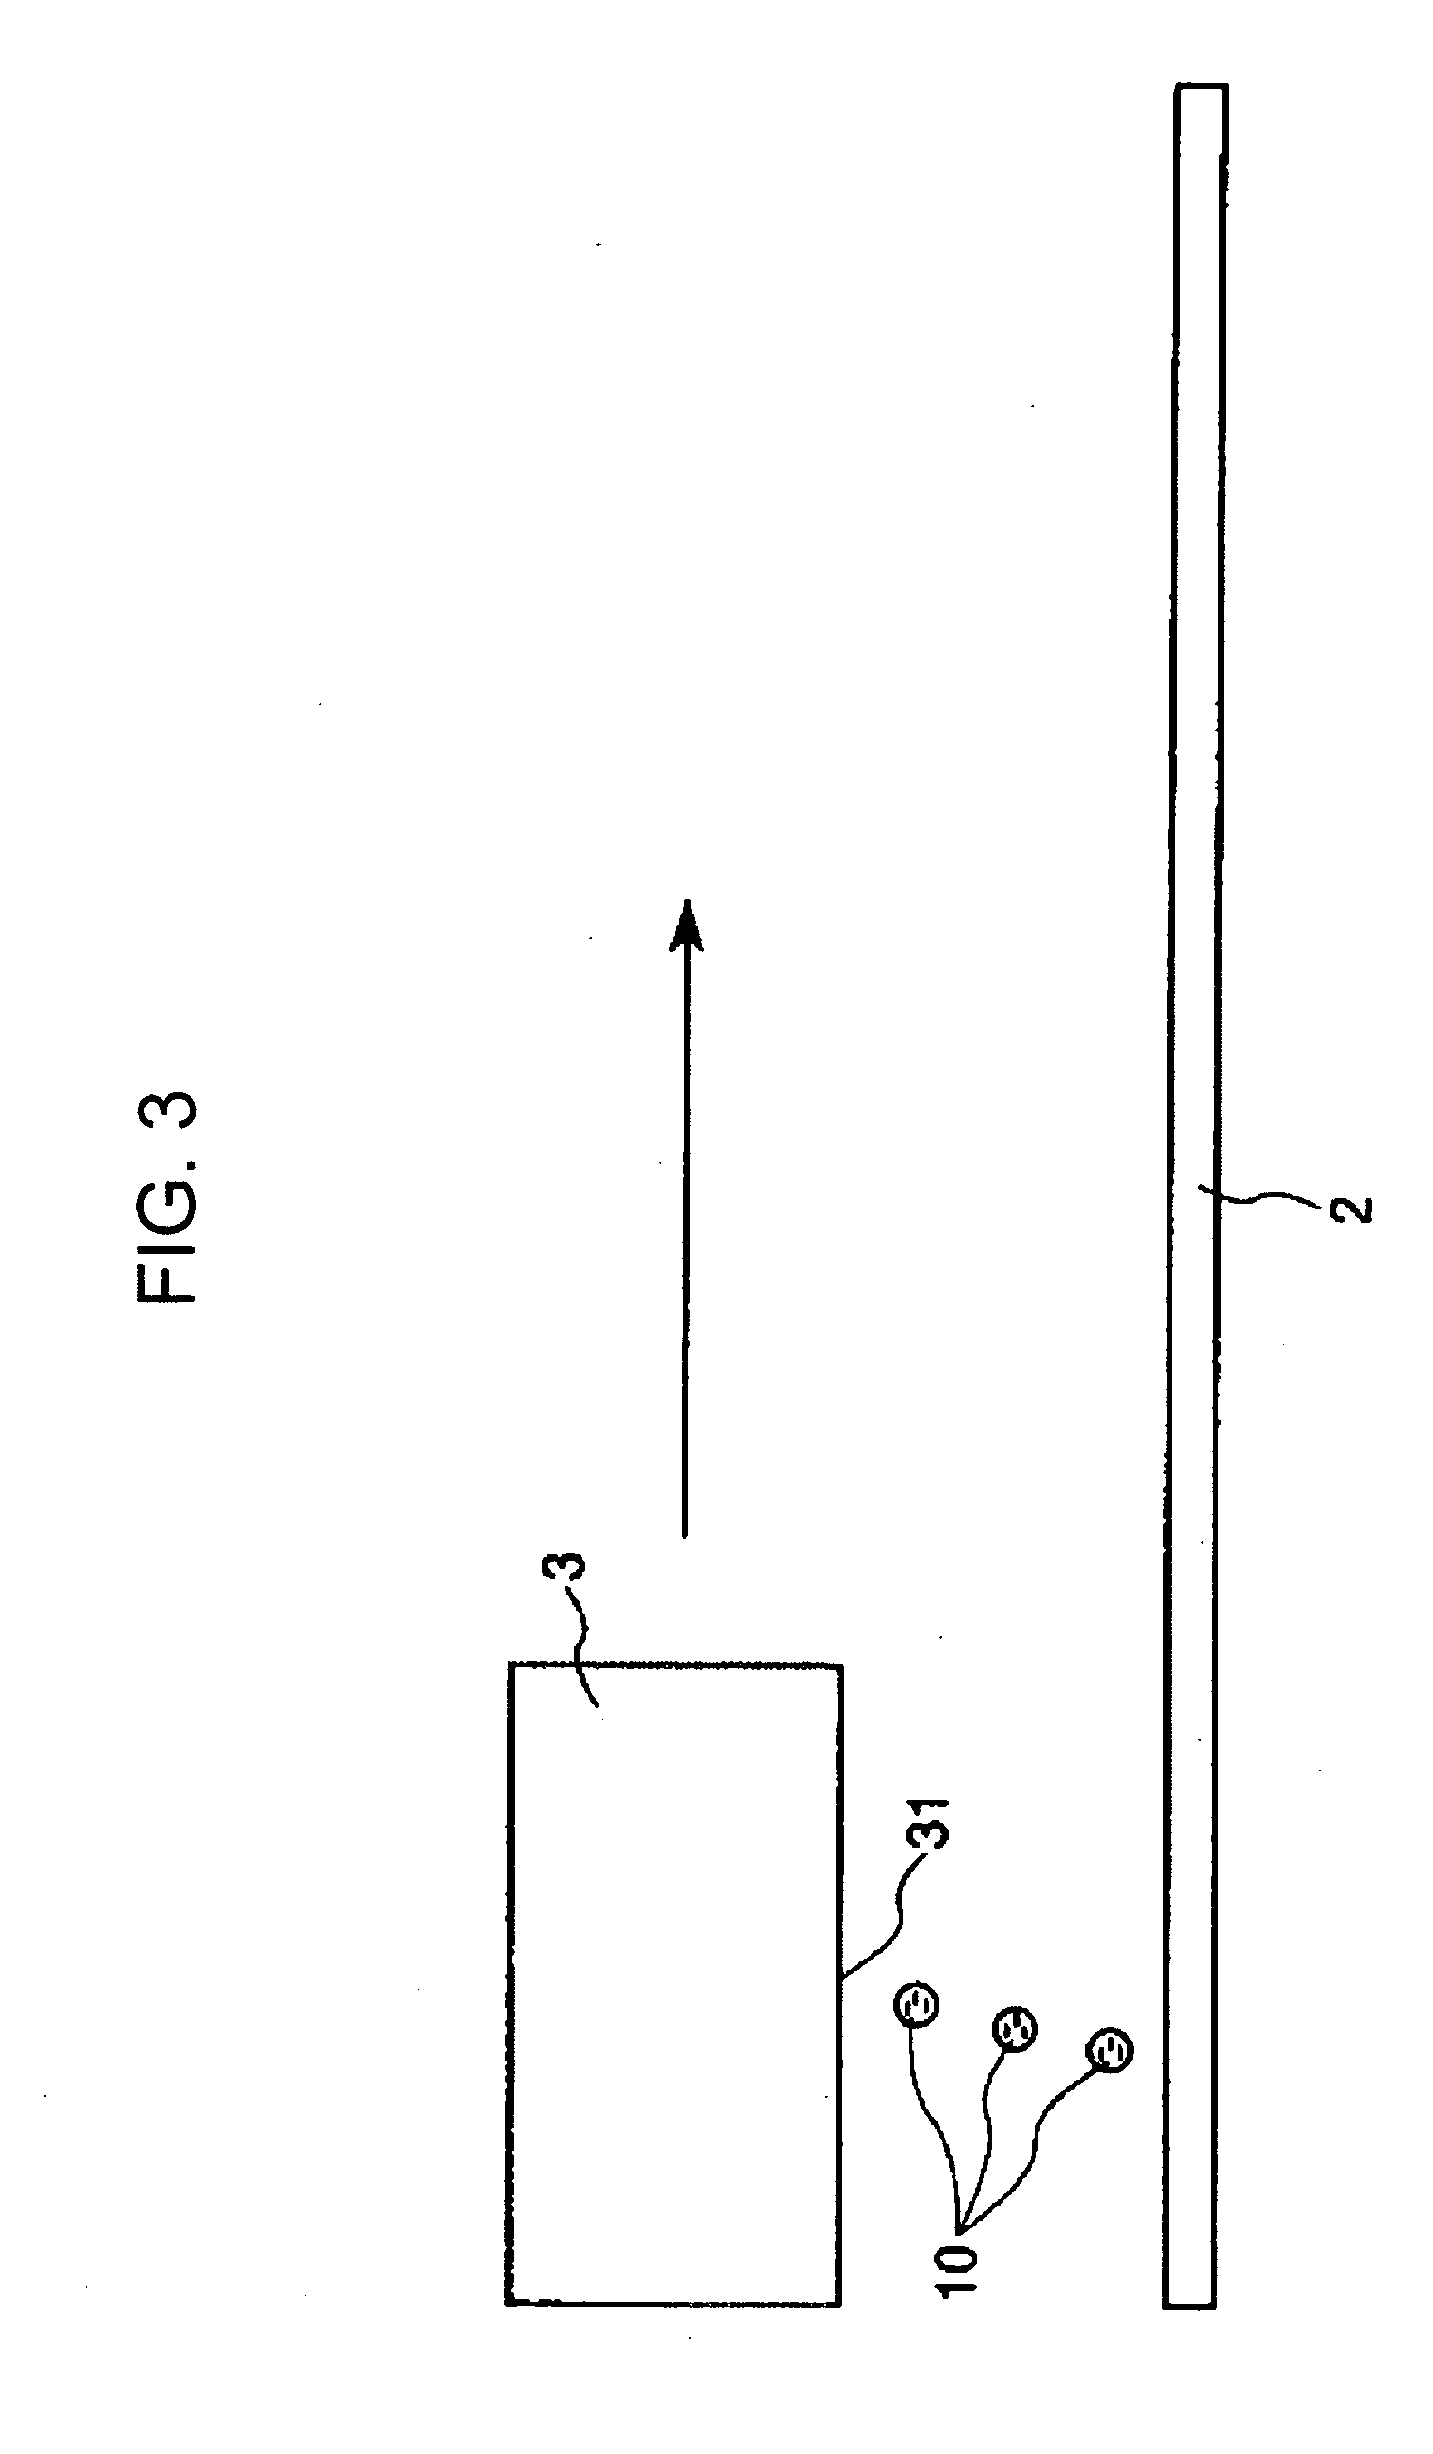 Substrate carrying method and substrate carrying apparatus